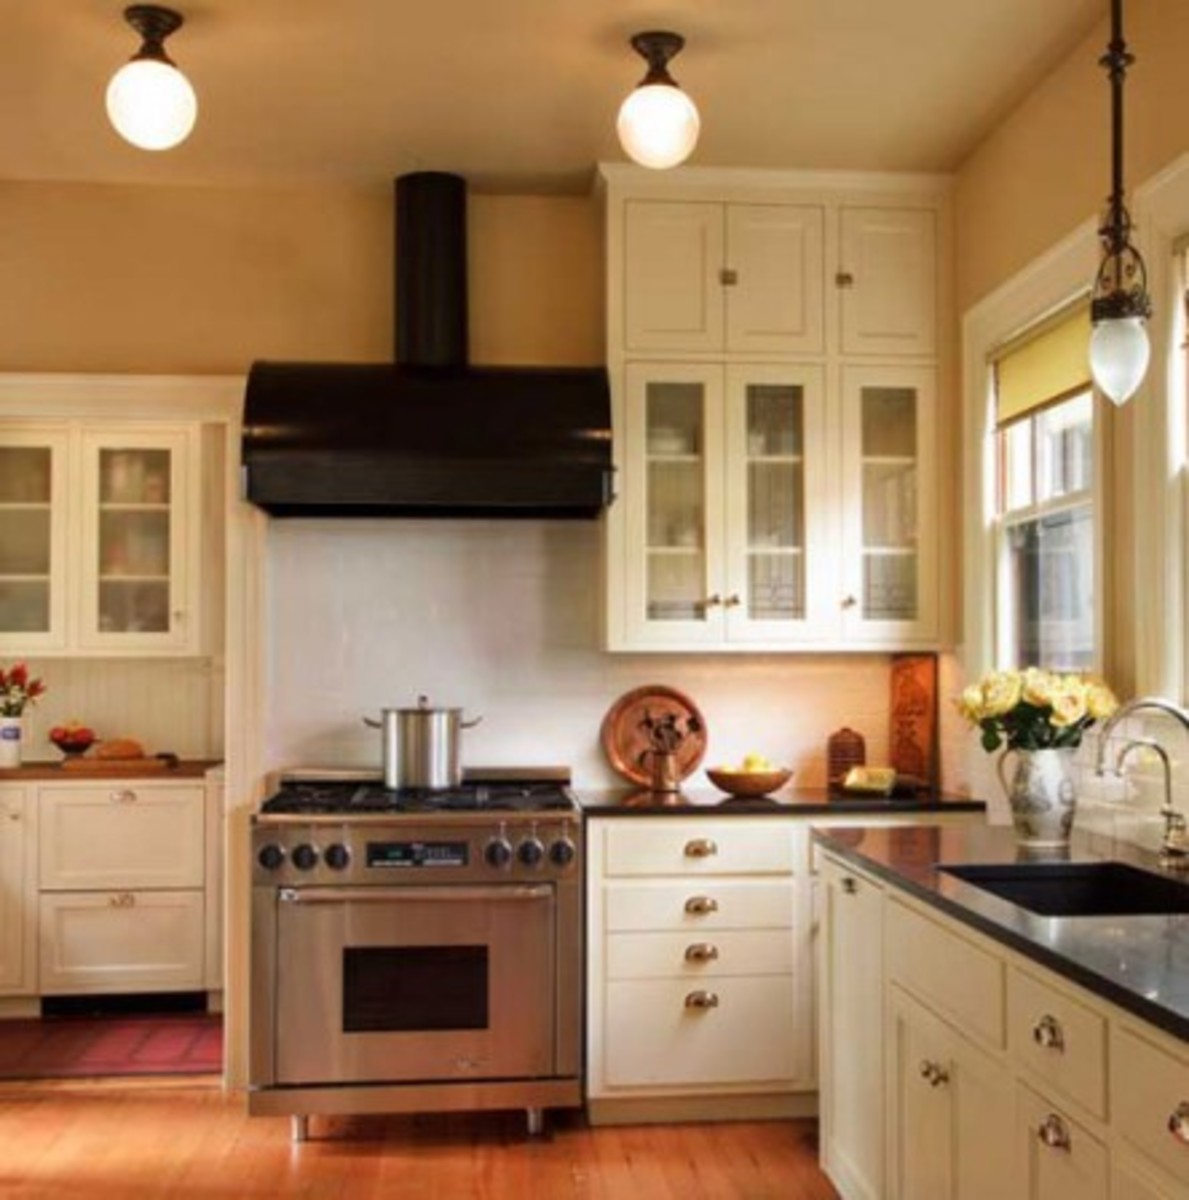 A Classic 1920s Kitchen Design for the Arts & Crafts House Arts